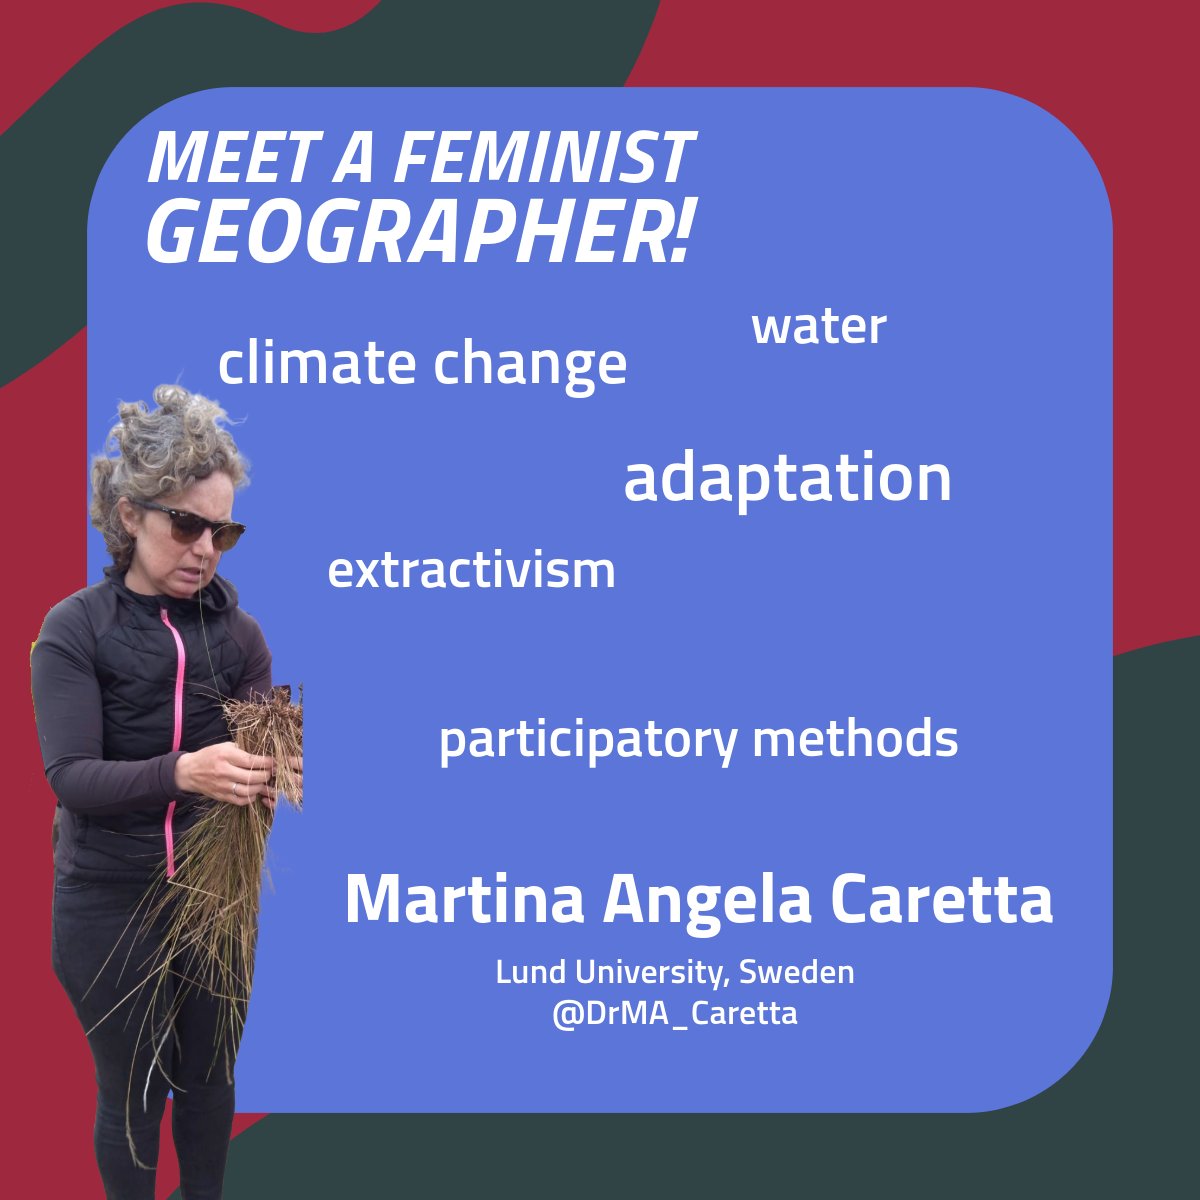 #MeetAFeministGeographer! @DrMA_Caretta of Lund University! She is a feminist geographer researching human-environment interactions with expertise in water, climate change adaptation, extractivism and gender....